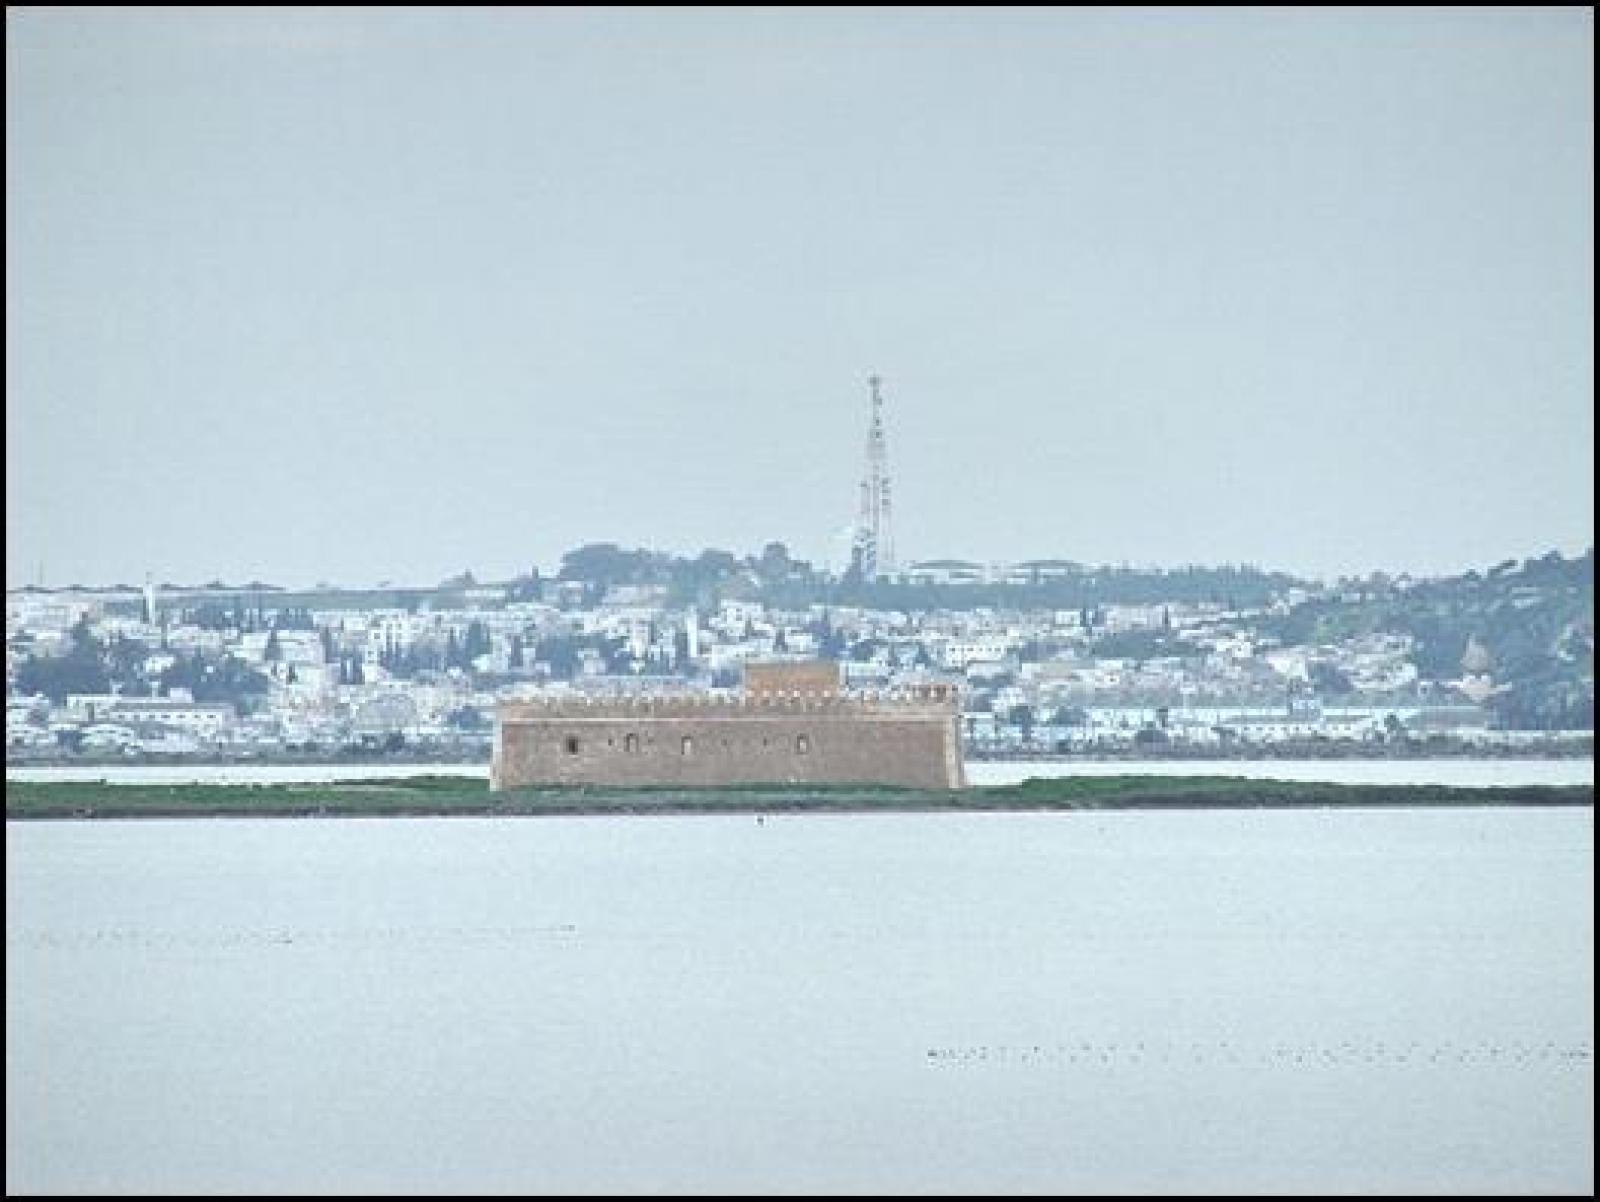 Image of the Chikly Fort from eastern side